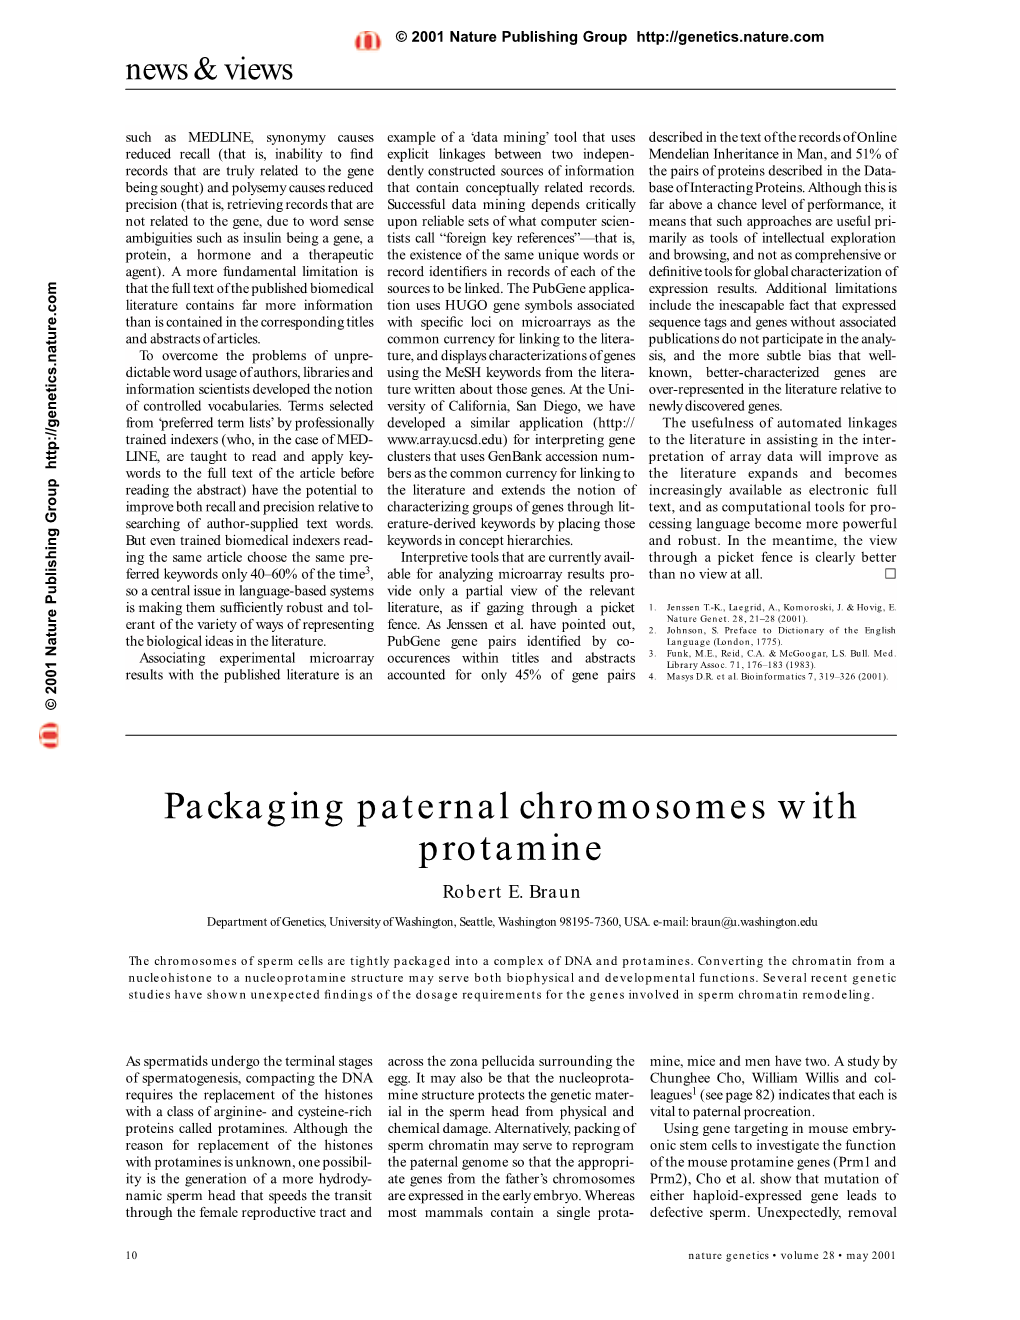 Packaging Paternal Chromosomes with Protamine Robert E